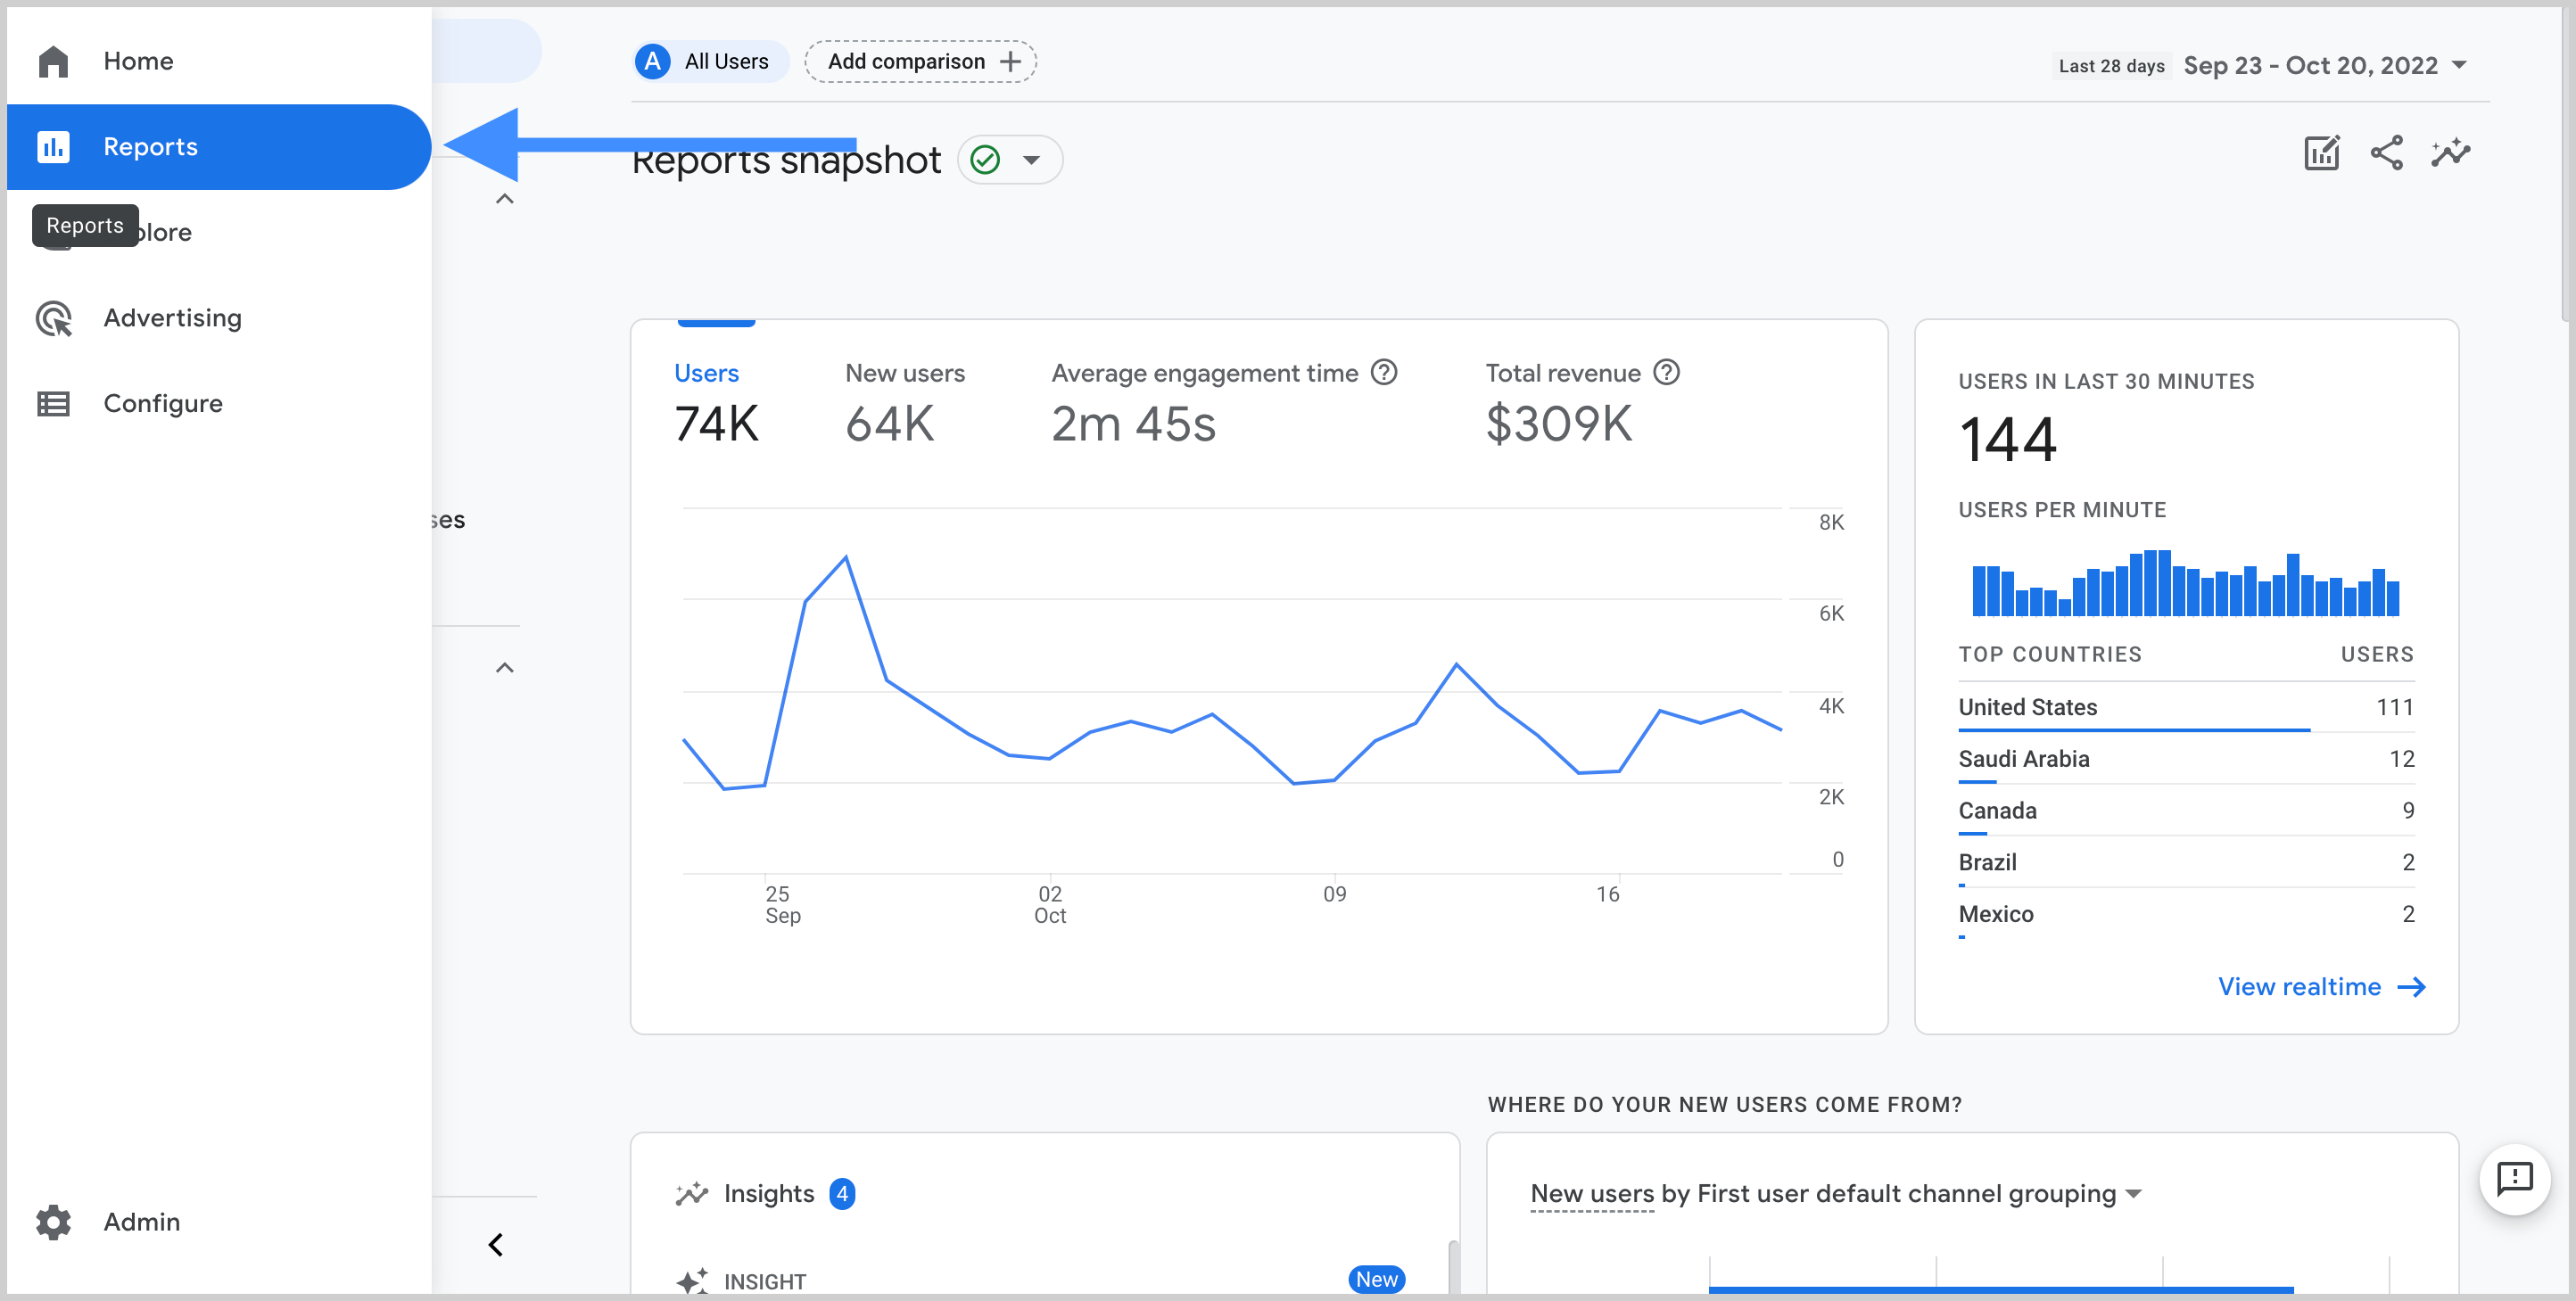 By offering Google Analytics services to your clients, you can help them track metrics like average engagement time.